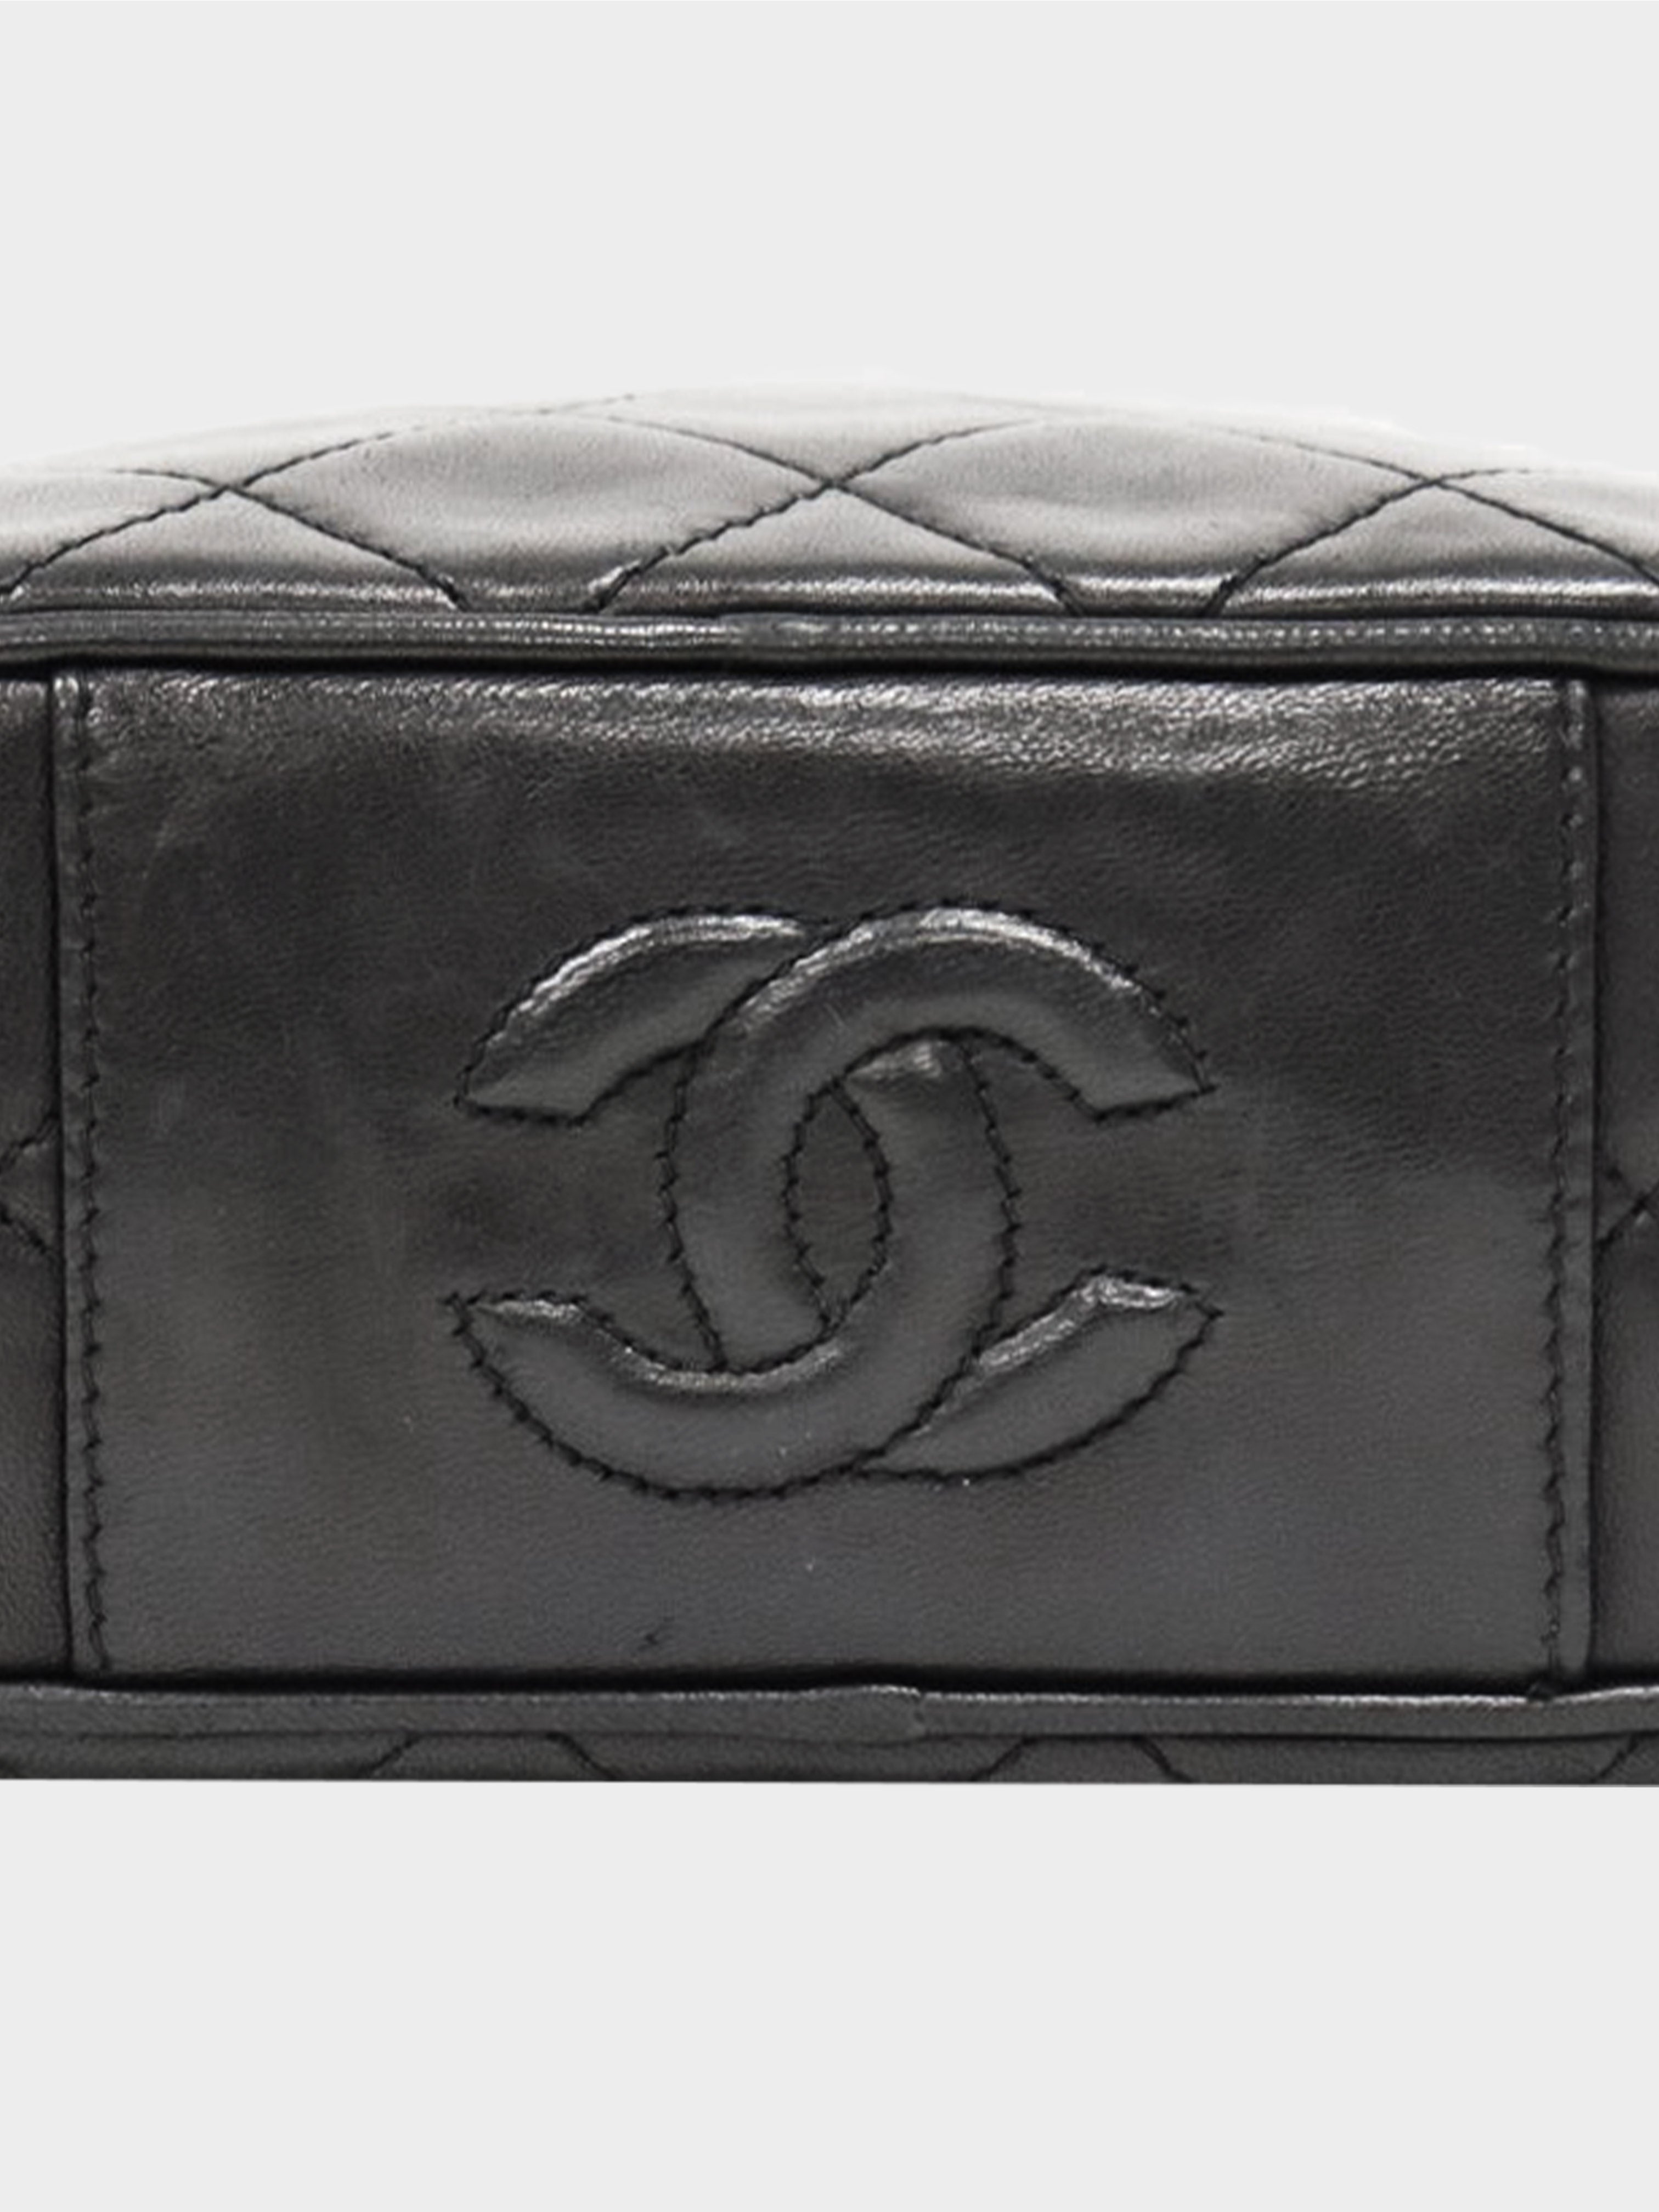 Chanel Lambskin Quilted Maxi Classic Single Flap Black